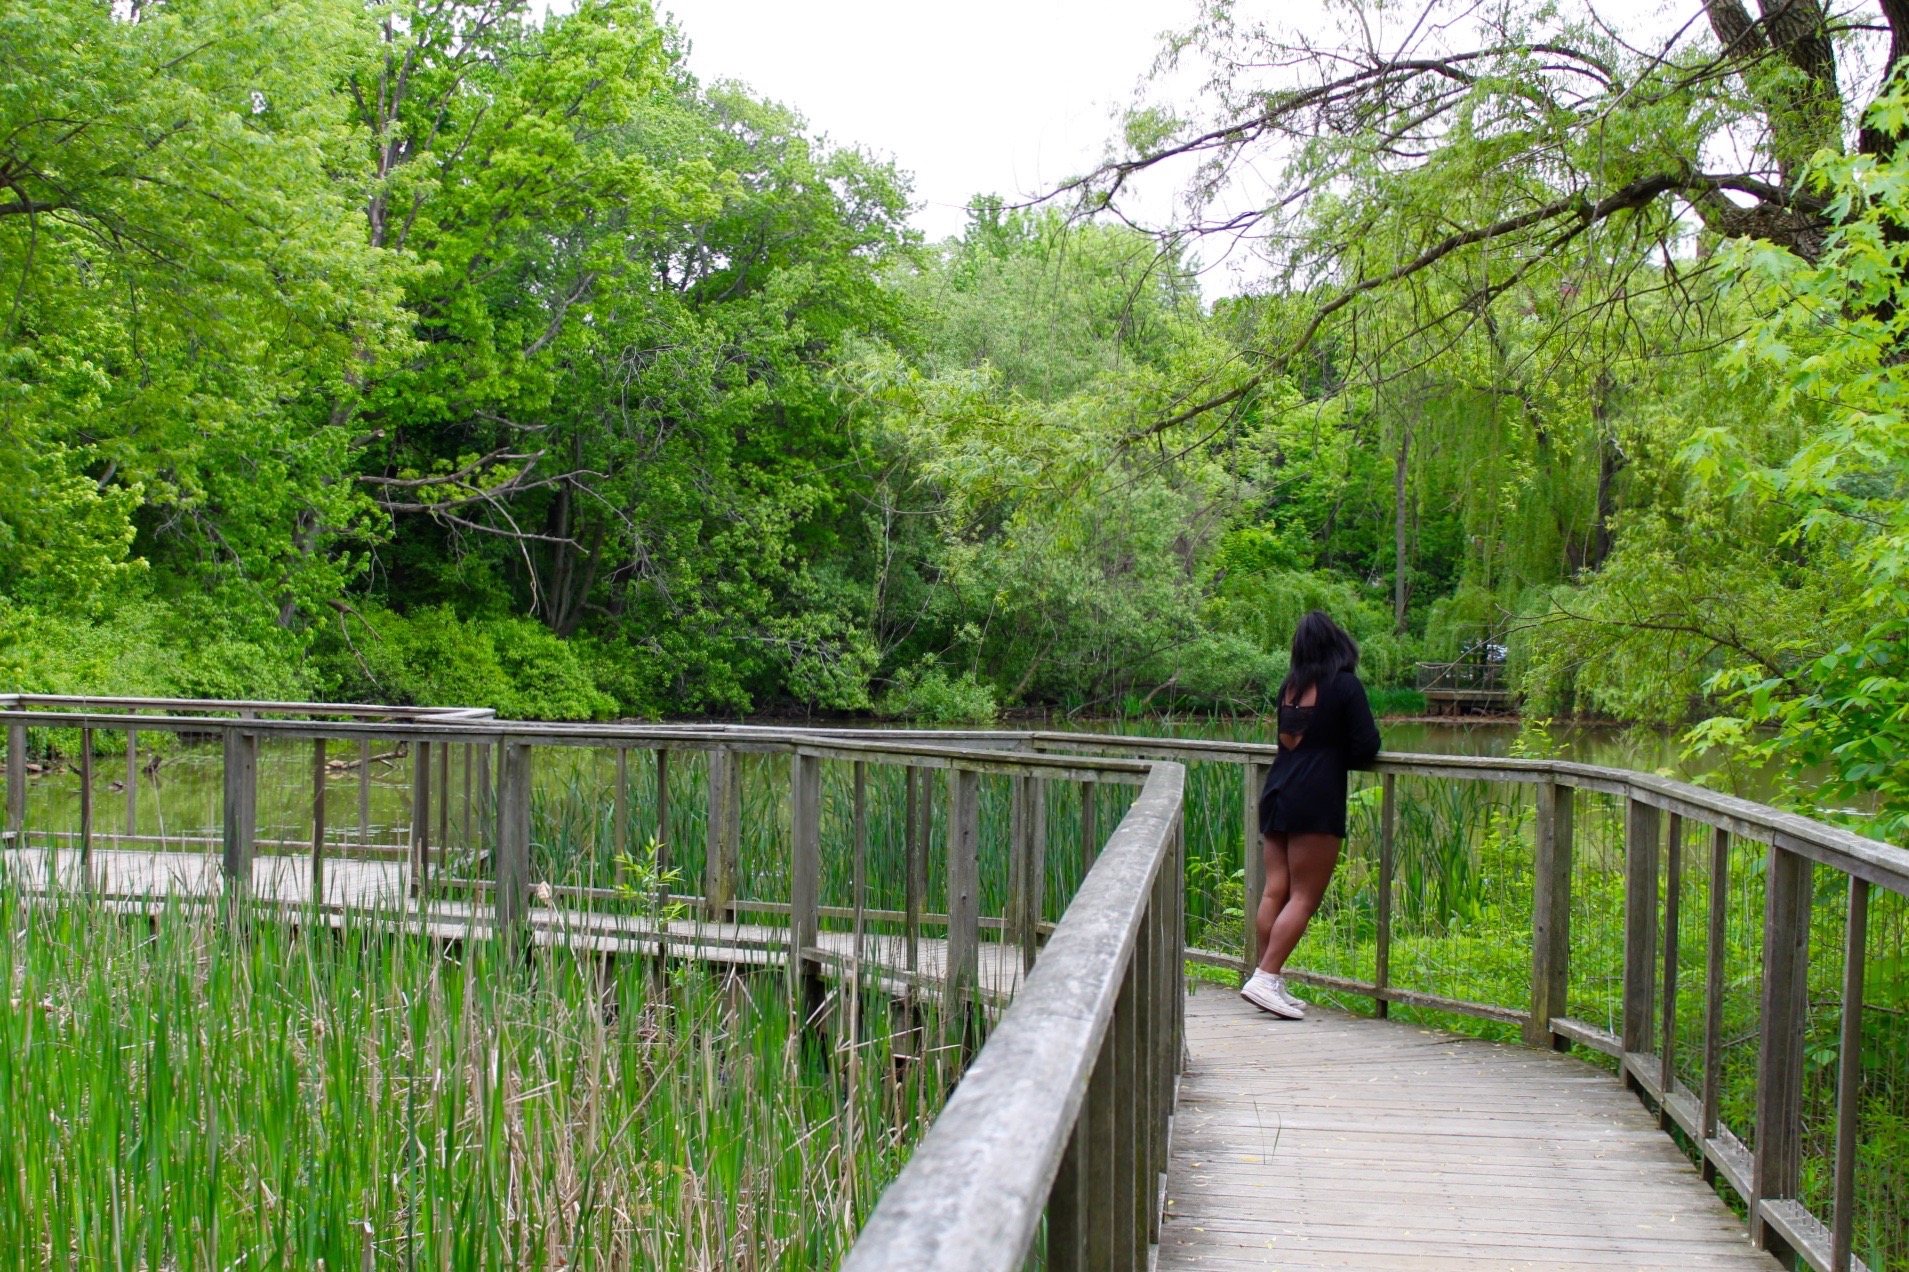 A BU student takes a walk through a cool and calm area of Brookline.